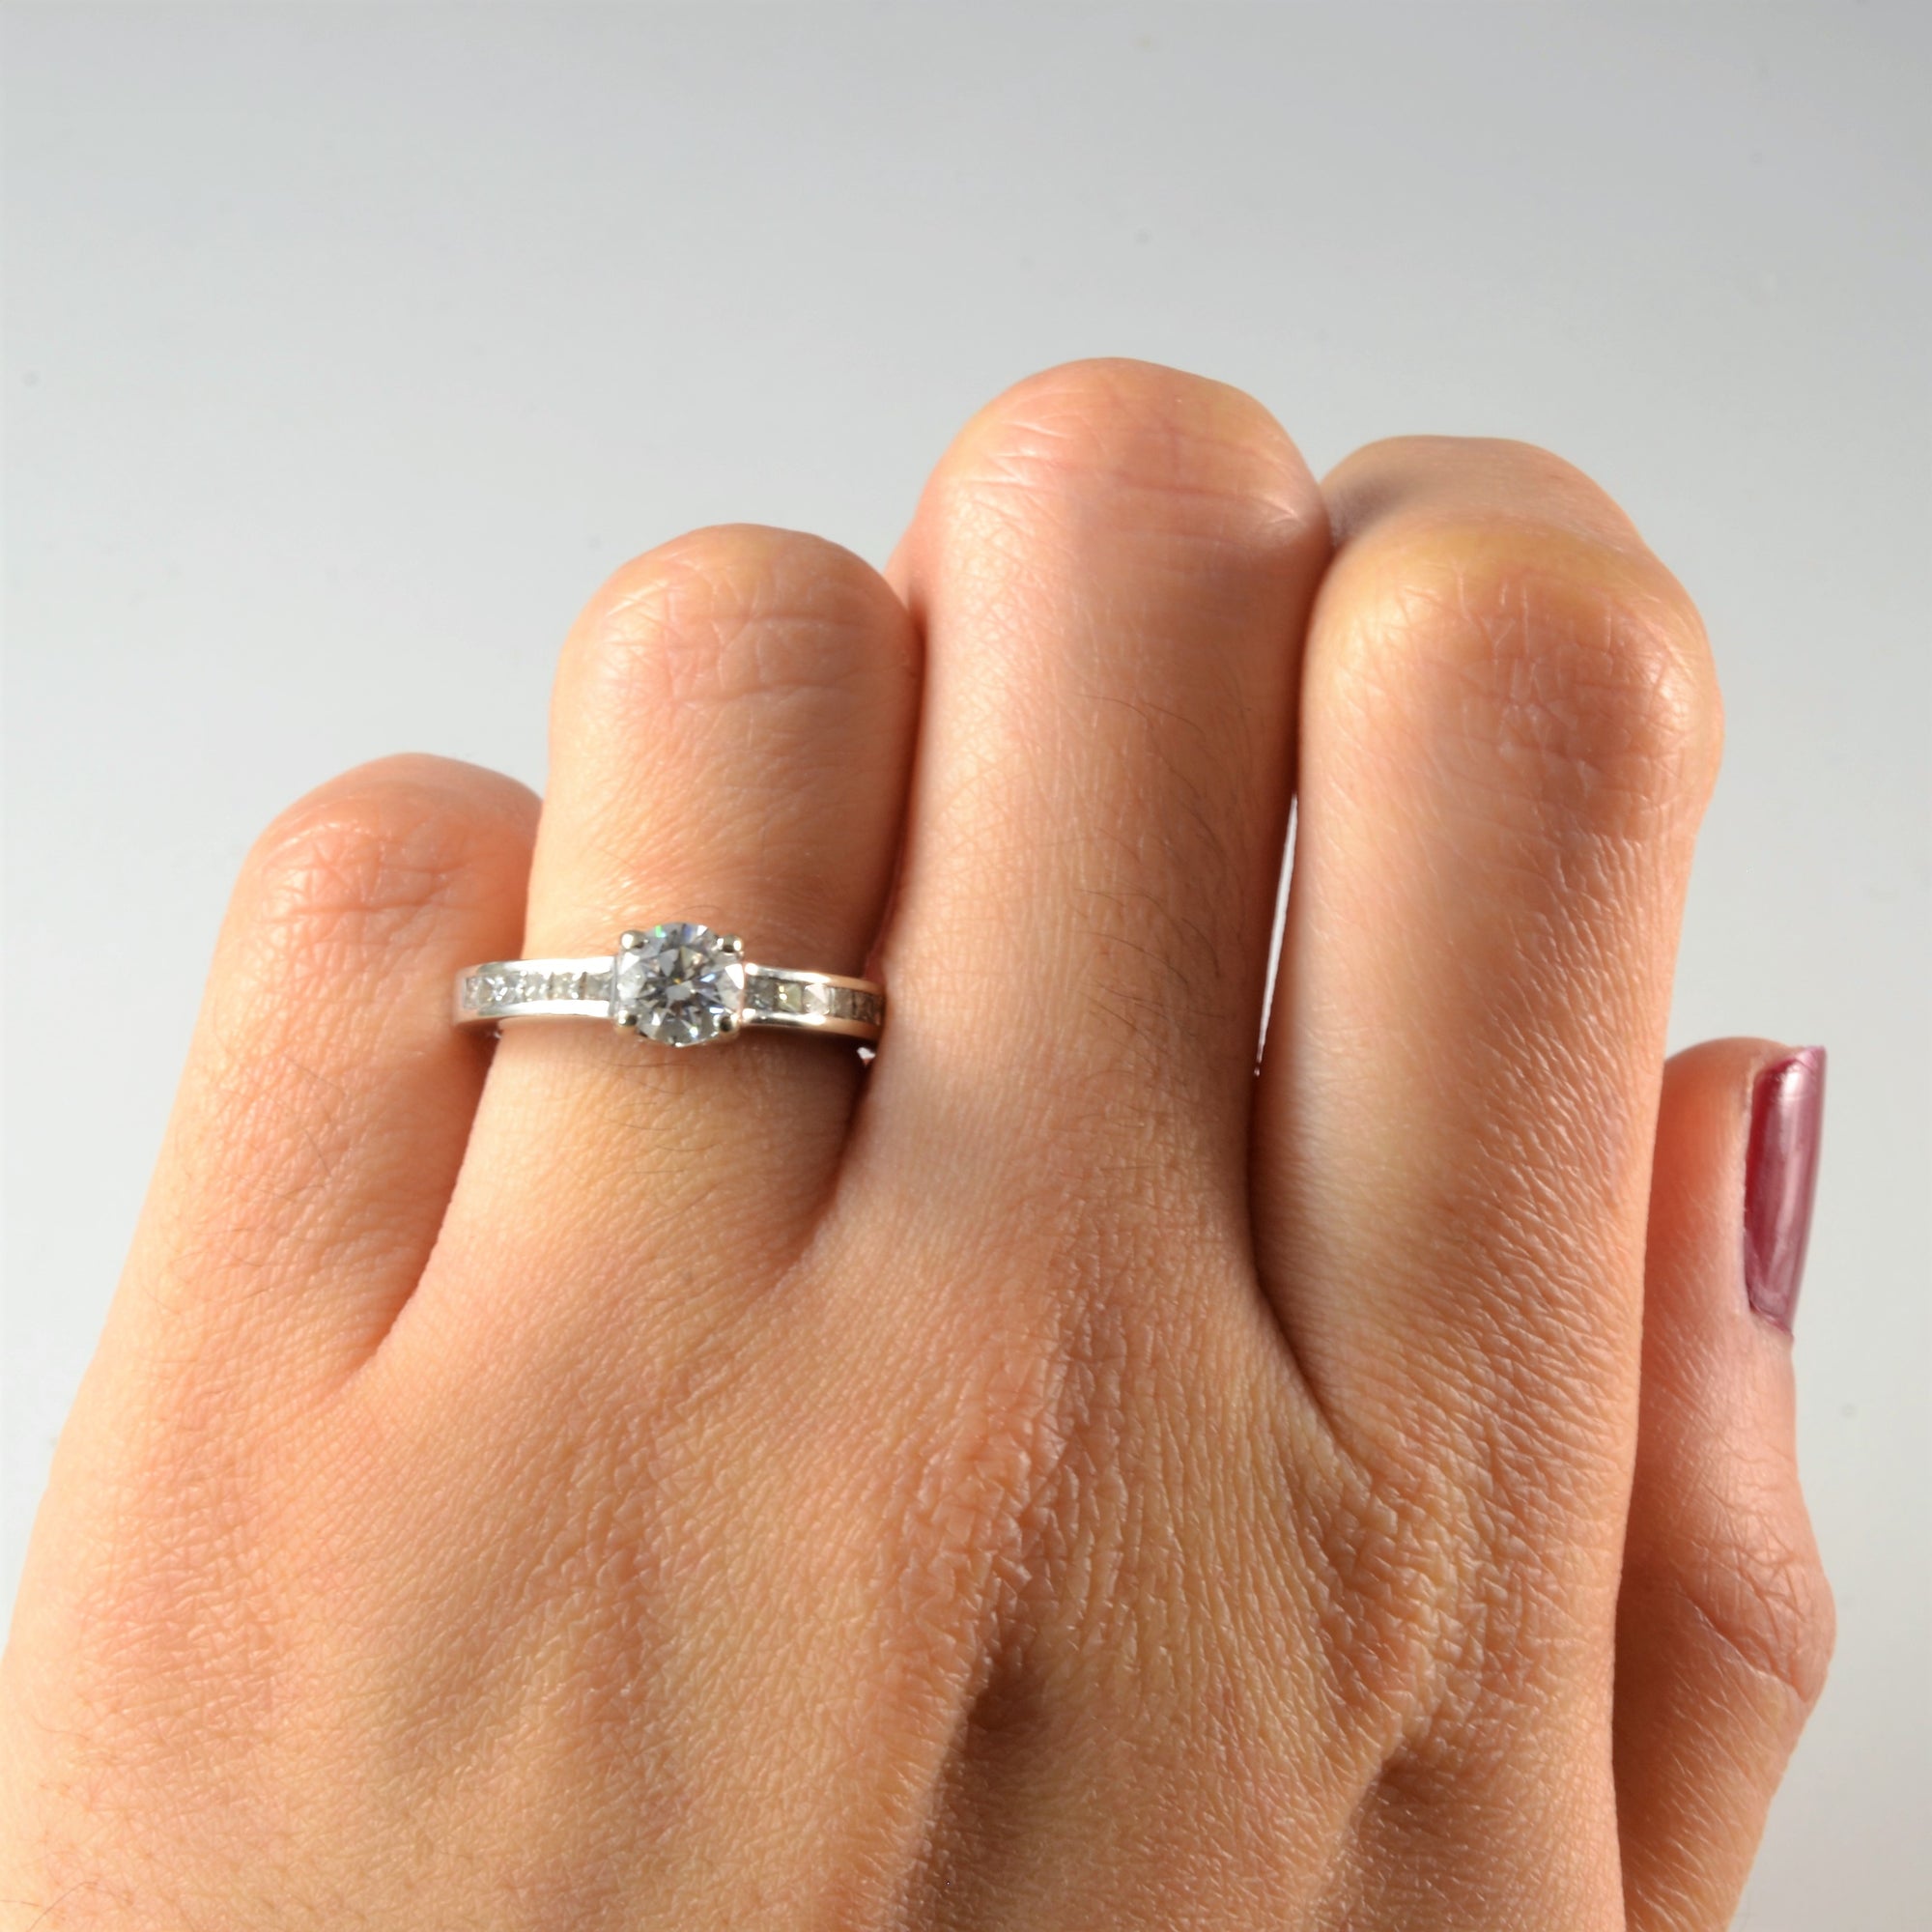 Detailed Diamond Gallery Engagement Ring | 0.95ctw | SZ 5 |